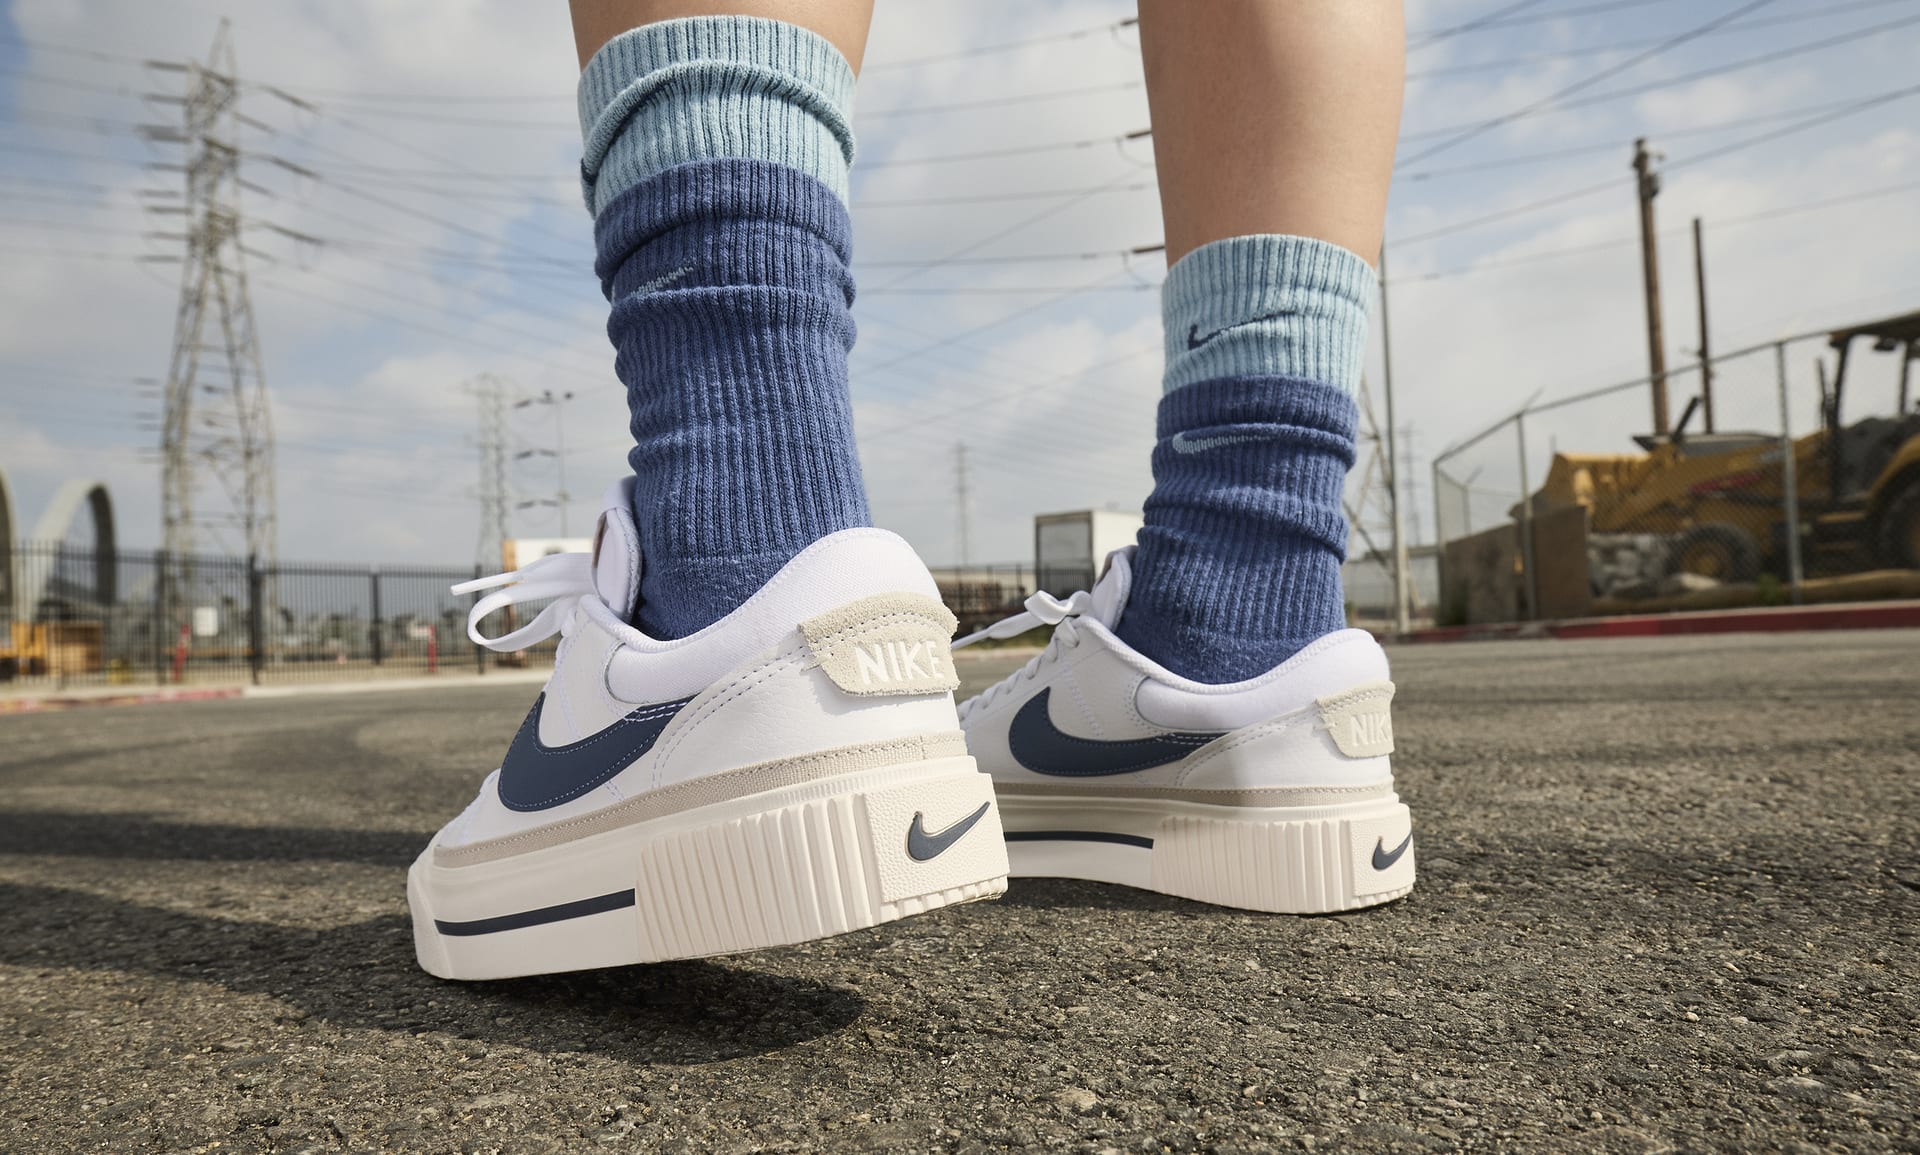 Time Out Sneaker - Women - Shoes